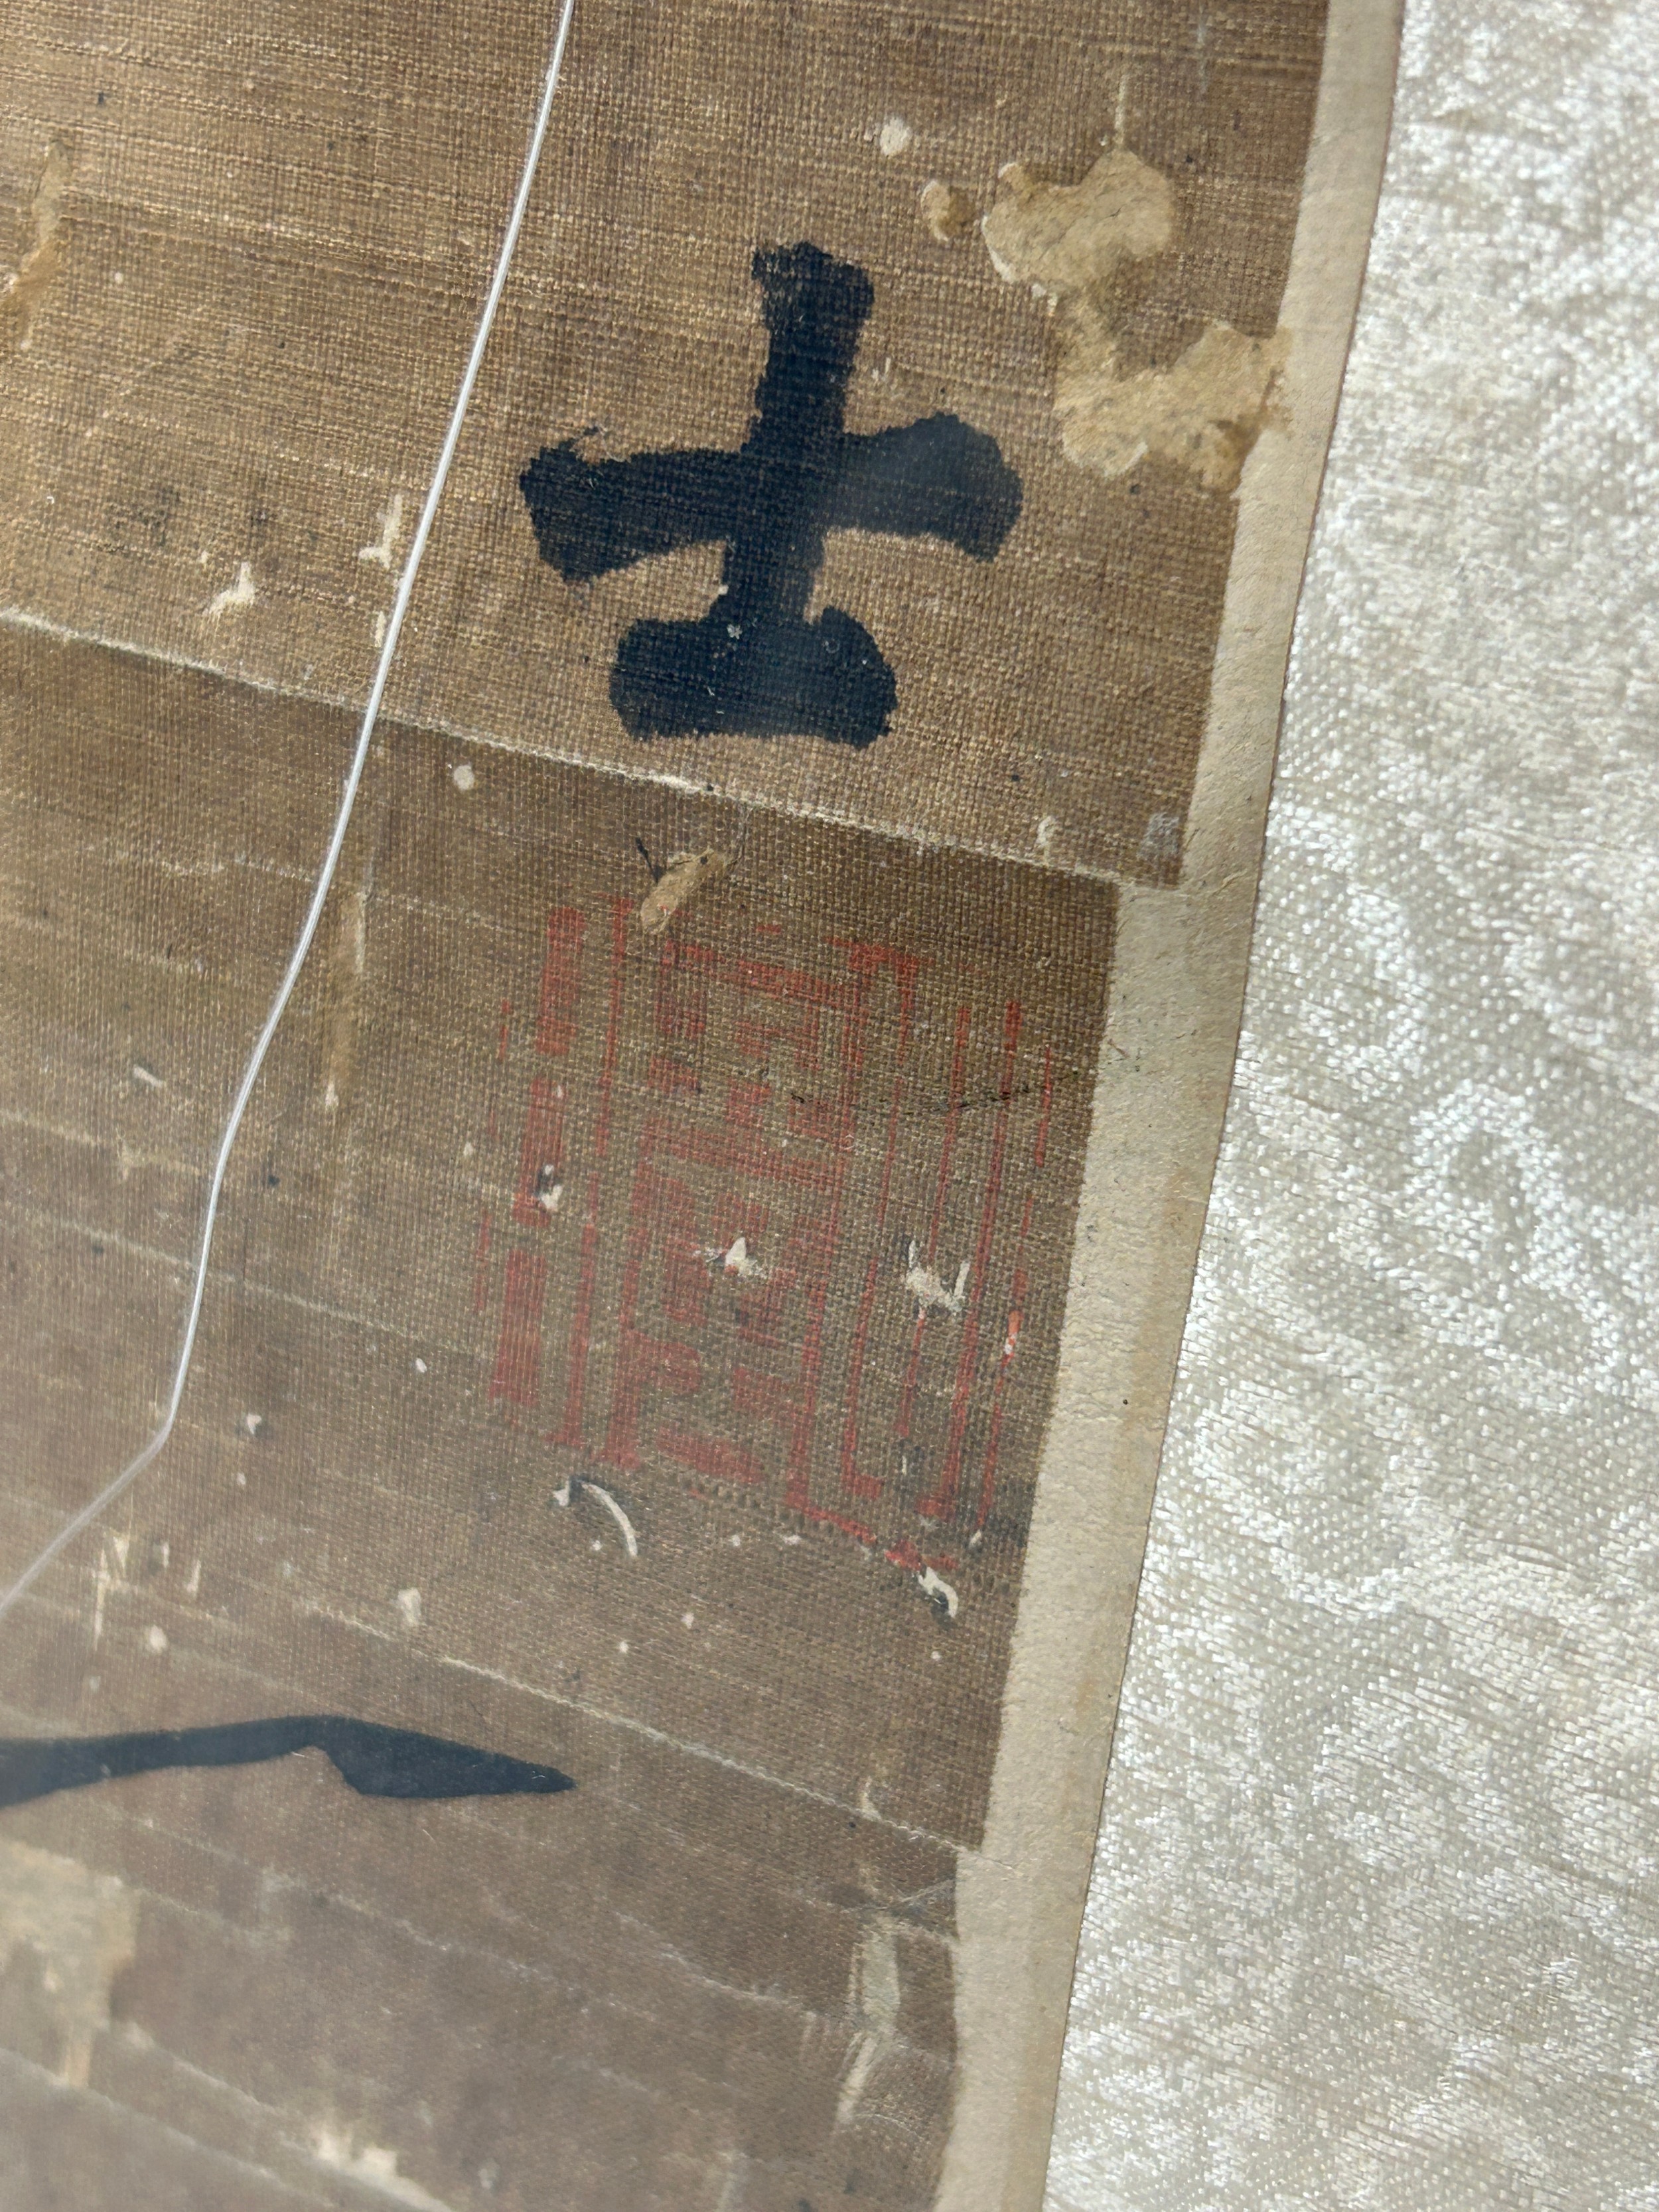 AFTER SU SHI (SU DONGPO) (1037-1101) : A PAINTING ON SCROLL DEPICTING BAMBOO STALKS WITH WRITING - Image 8 of 11